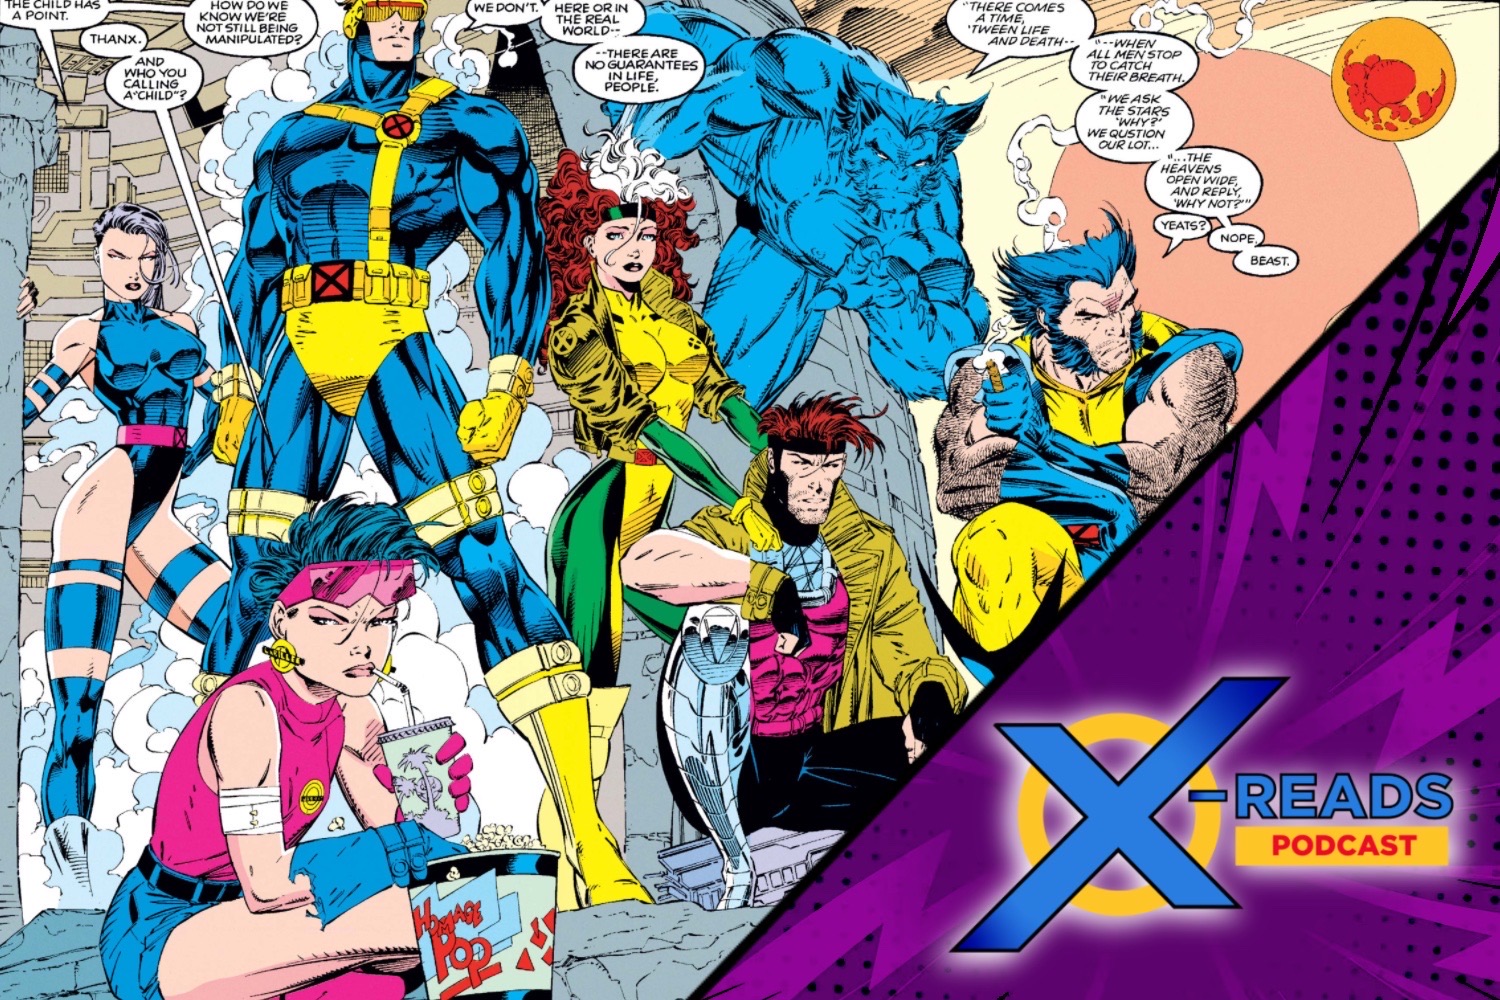 X-Reads Podcast Episode 101: 'X-Men' #11 - Into the Mojoverse